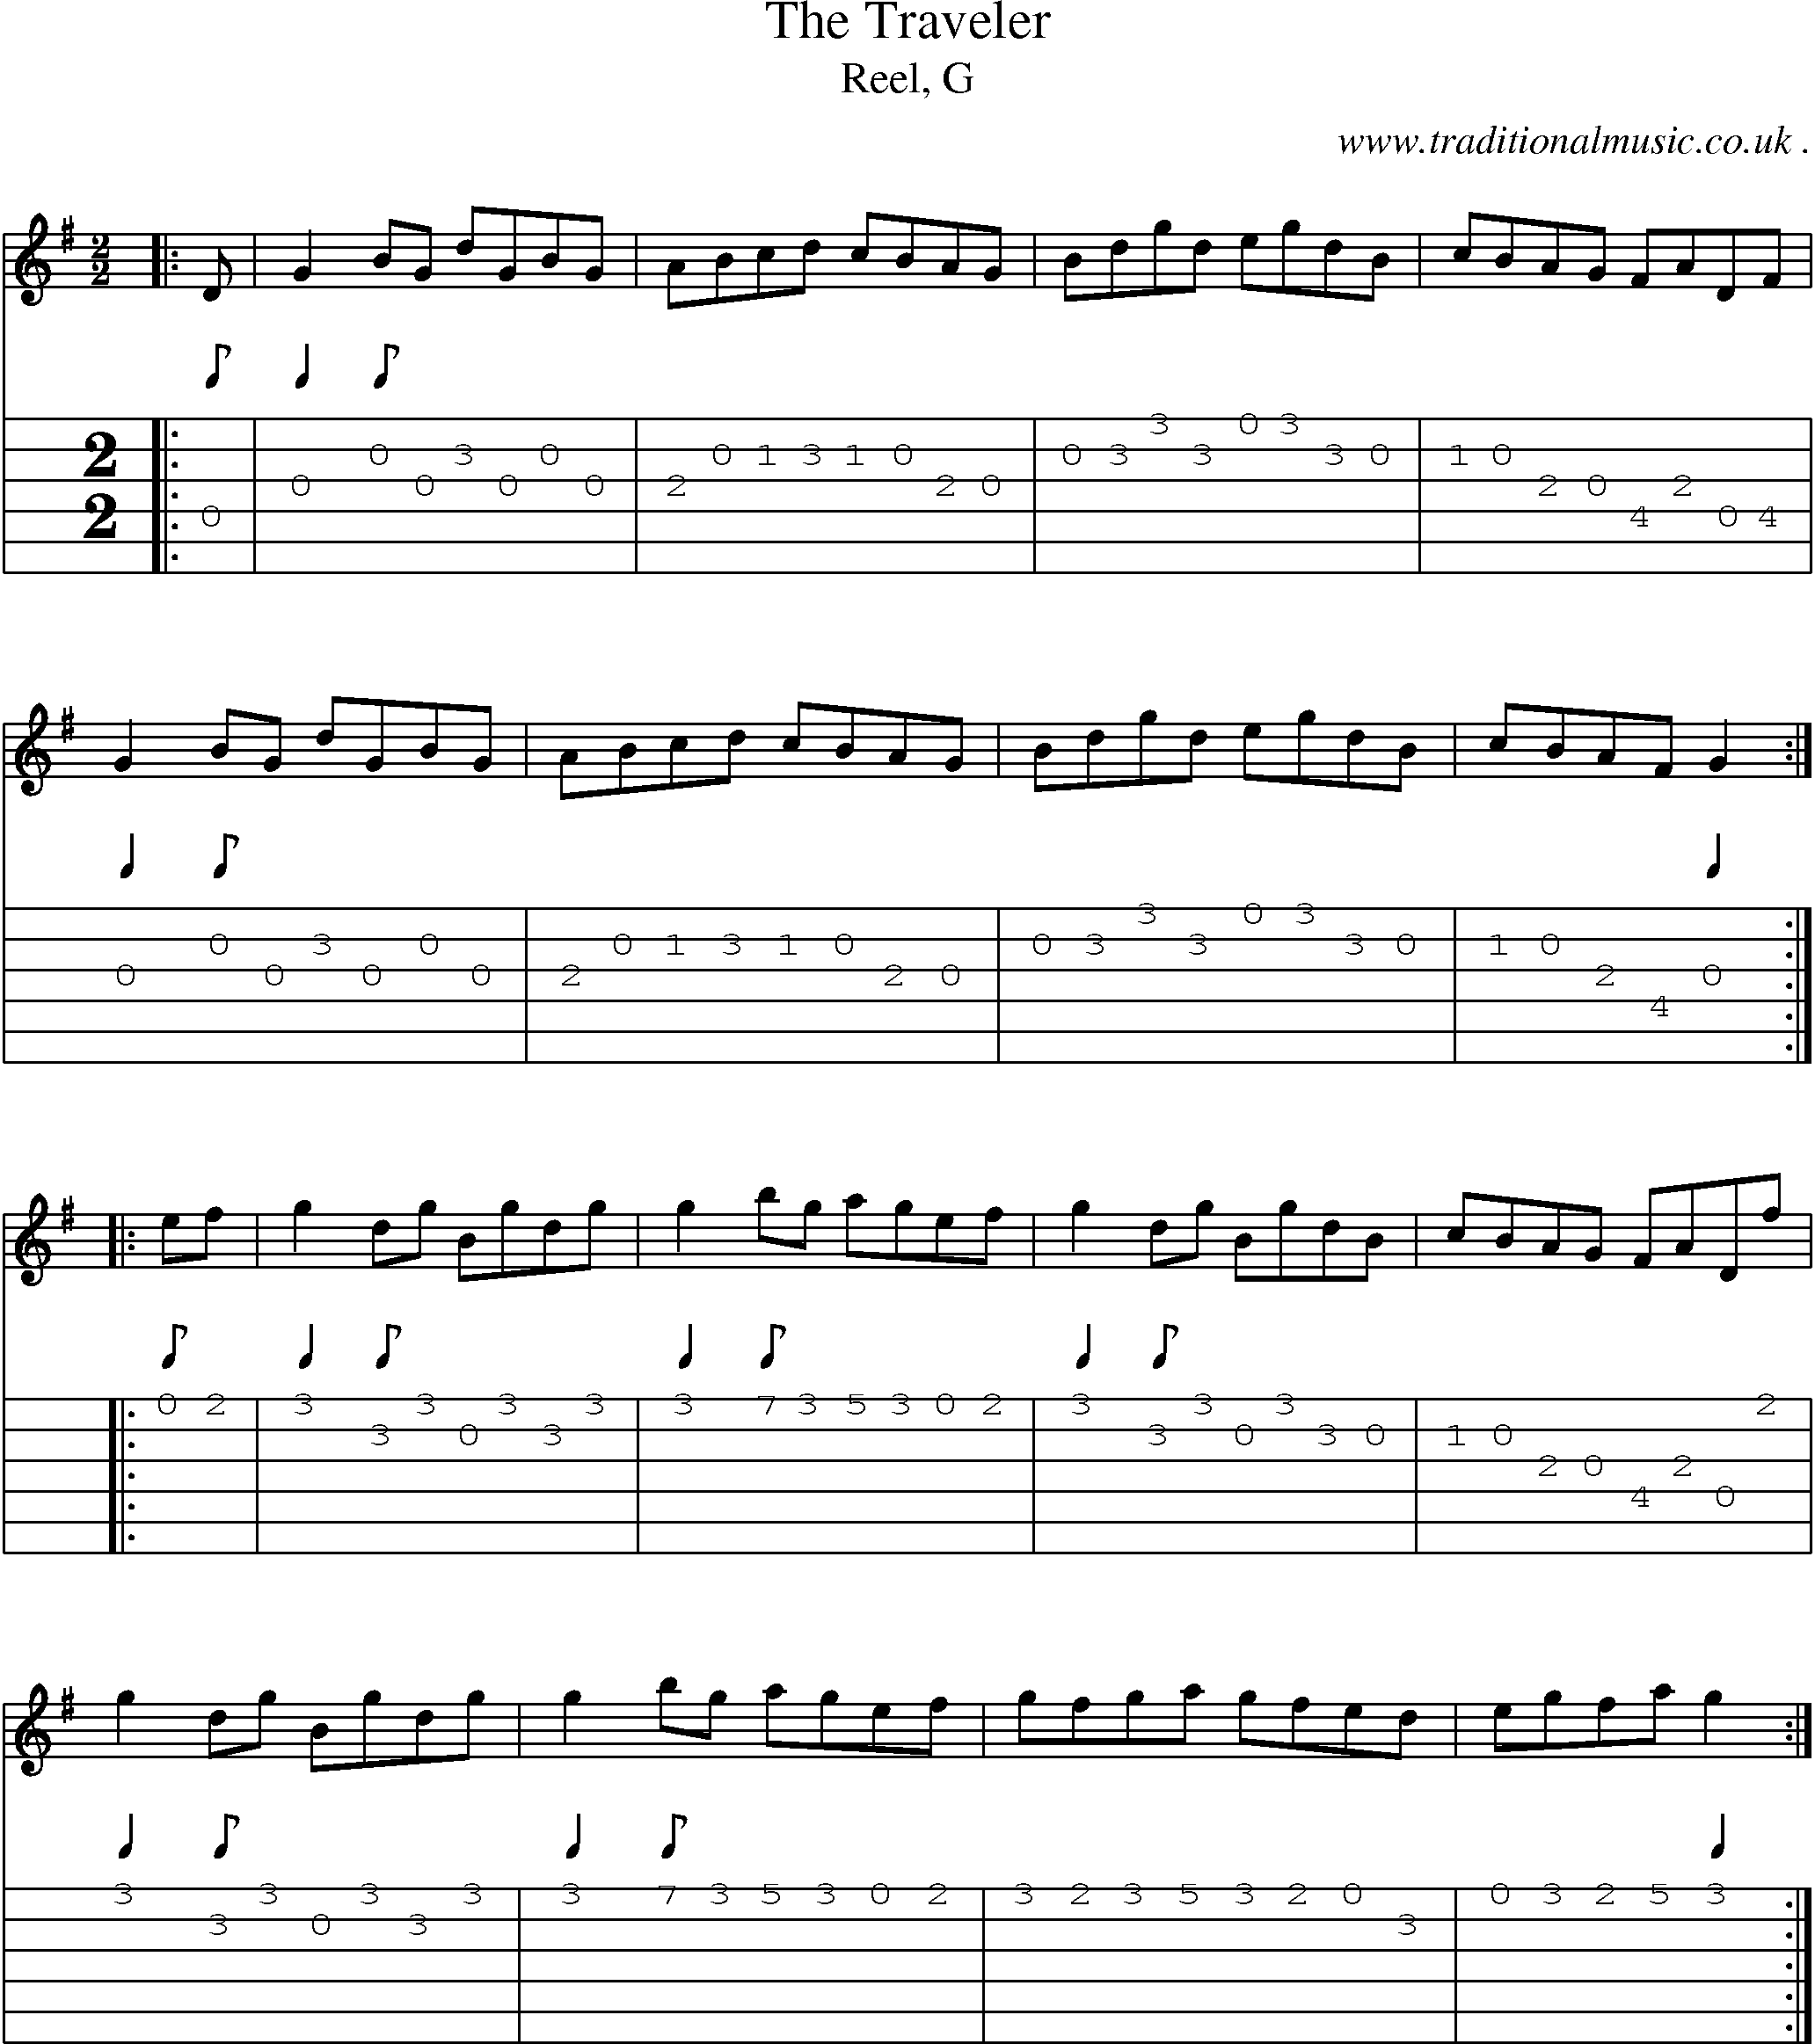 Sheet-music  score, Chords and Guitar Tabs for The Traveler